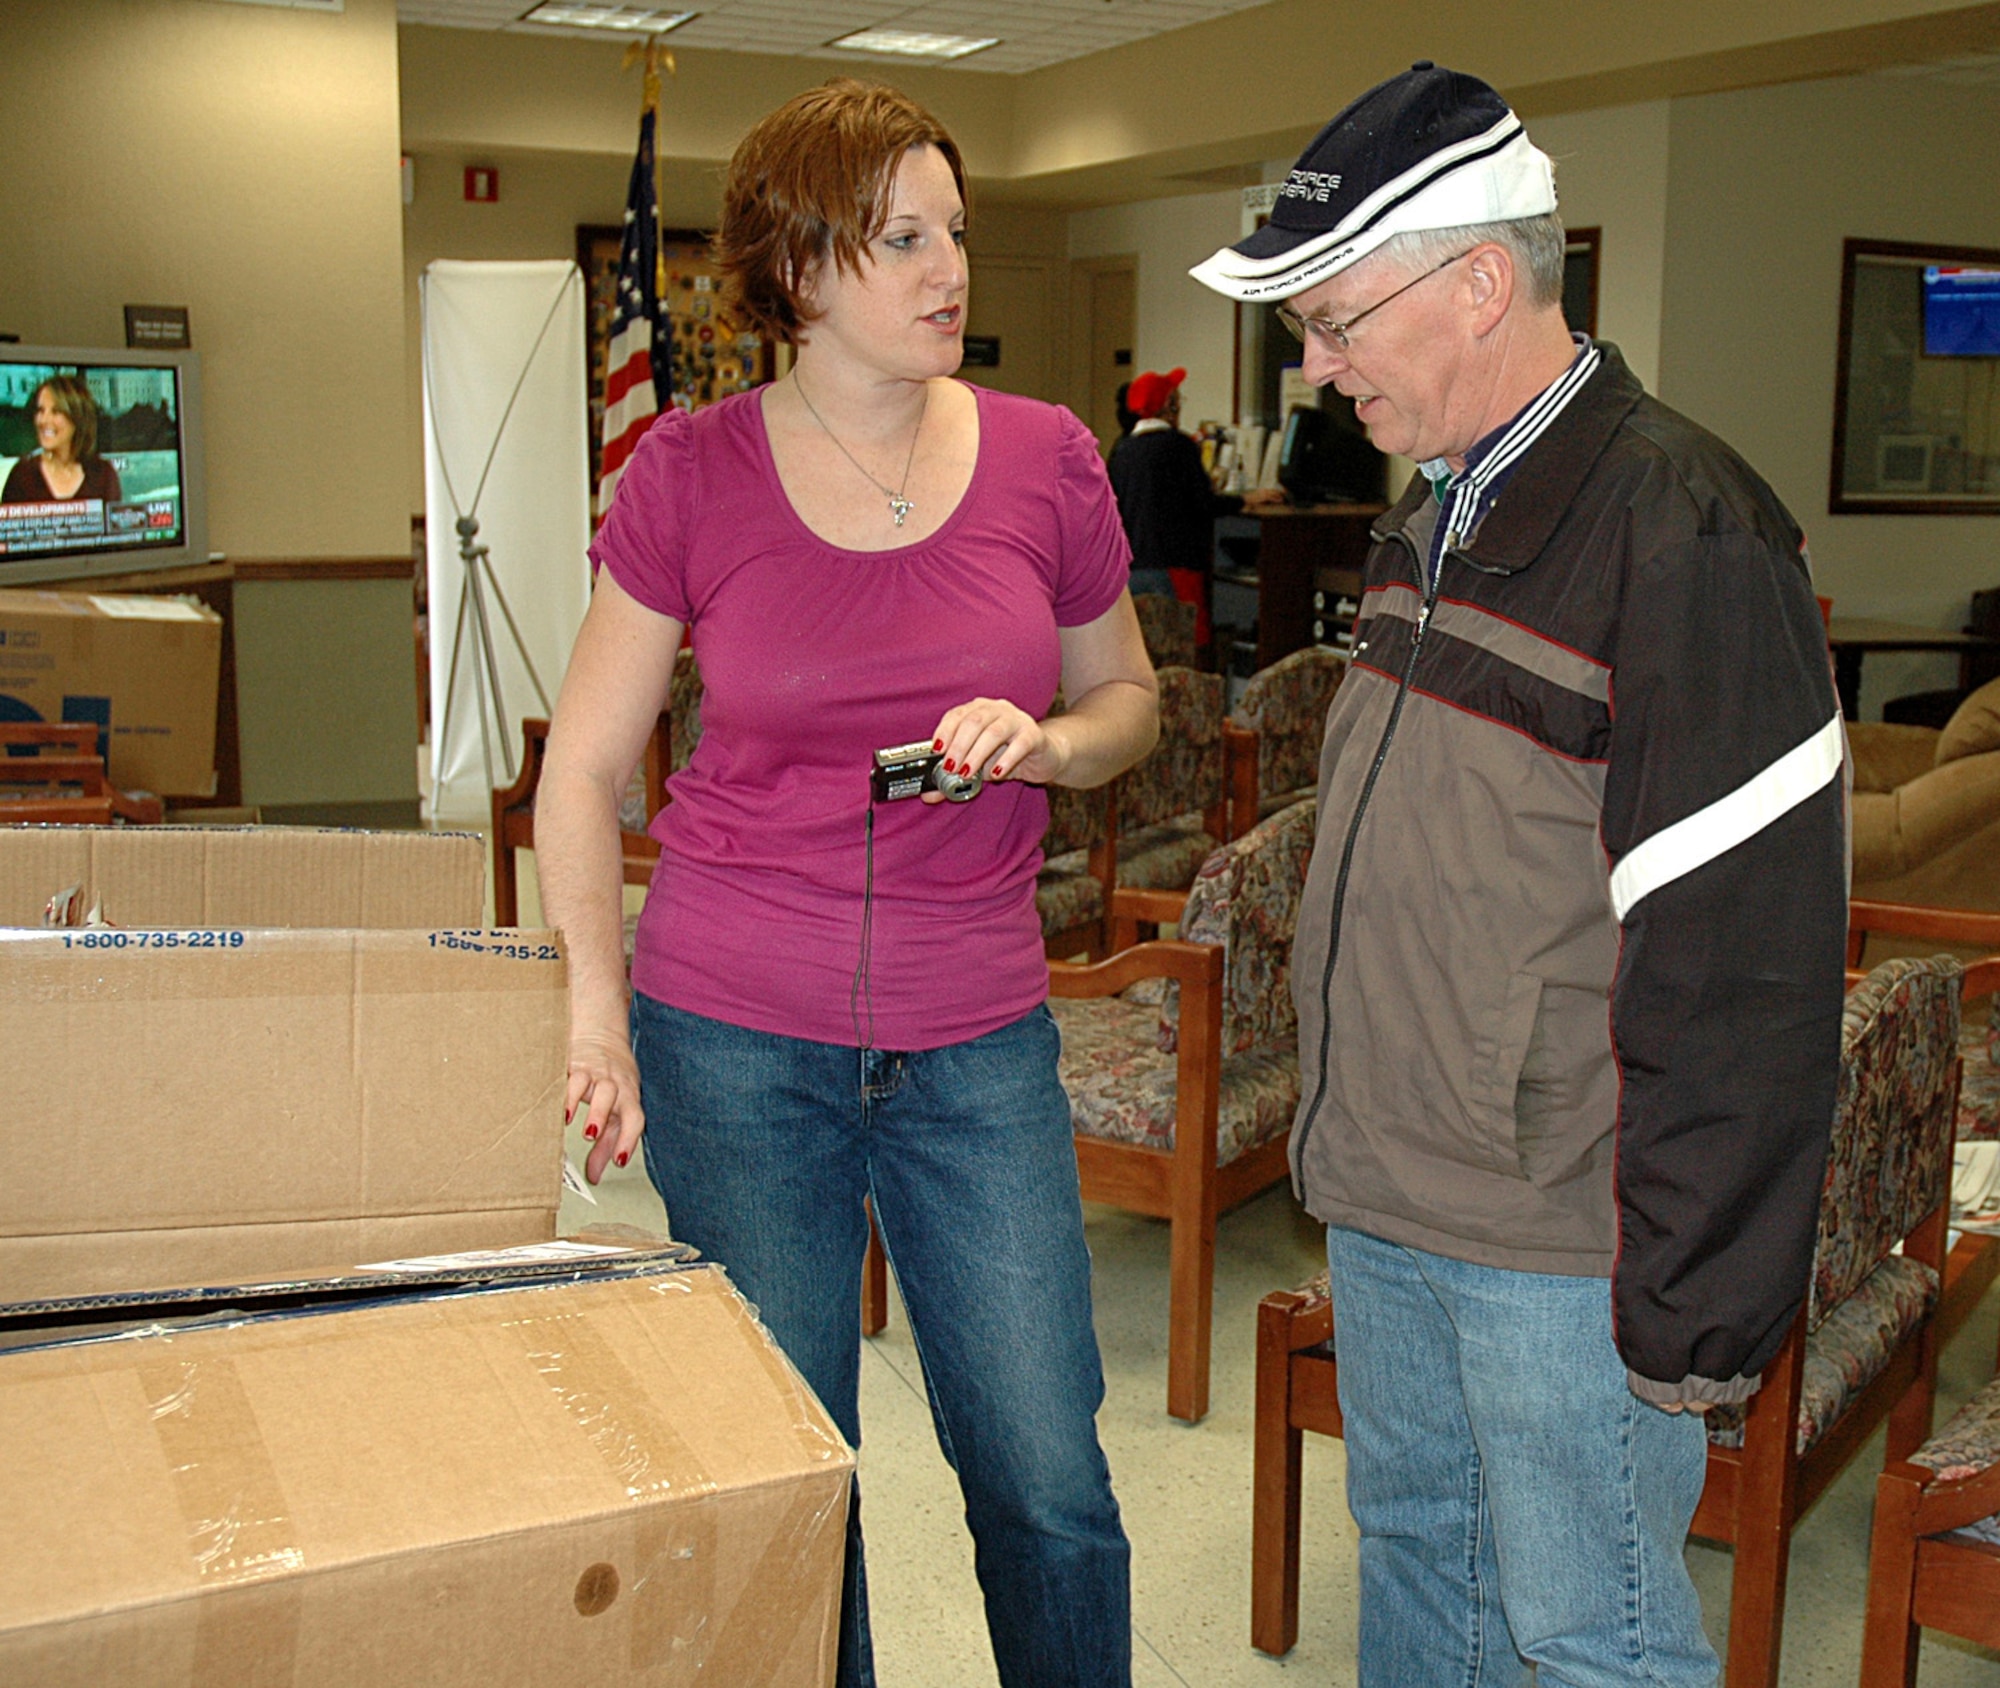 MCCHORD AIR FORCE BASE, Wash., - Traceye Kakely, (left) Puget Sound USO McChord Center, and Carl Supple, director of the 446th Mission Support Squadron's Airmen & Family Readiness Center here, review the boxes of canned goods donated through the Puget Sound USO McChord Center.  Enough food was donated to put in Thanksgiving Baskests for 54 Reserve families in the 446th Airlift Wing. (U.S. Air Force photo/Sandra Pishner)